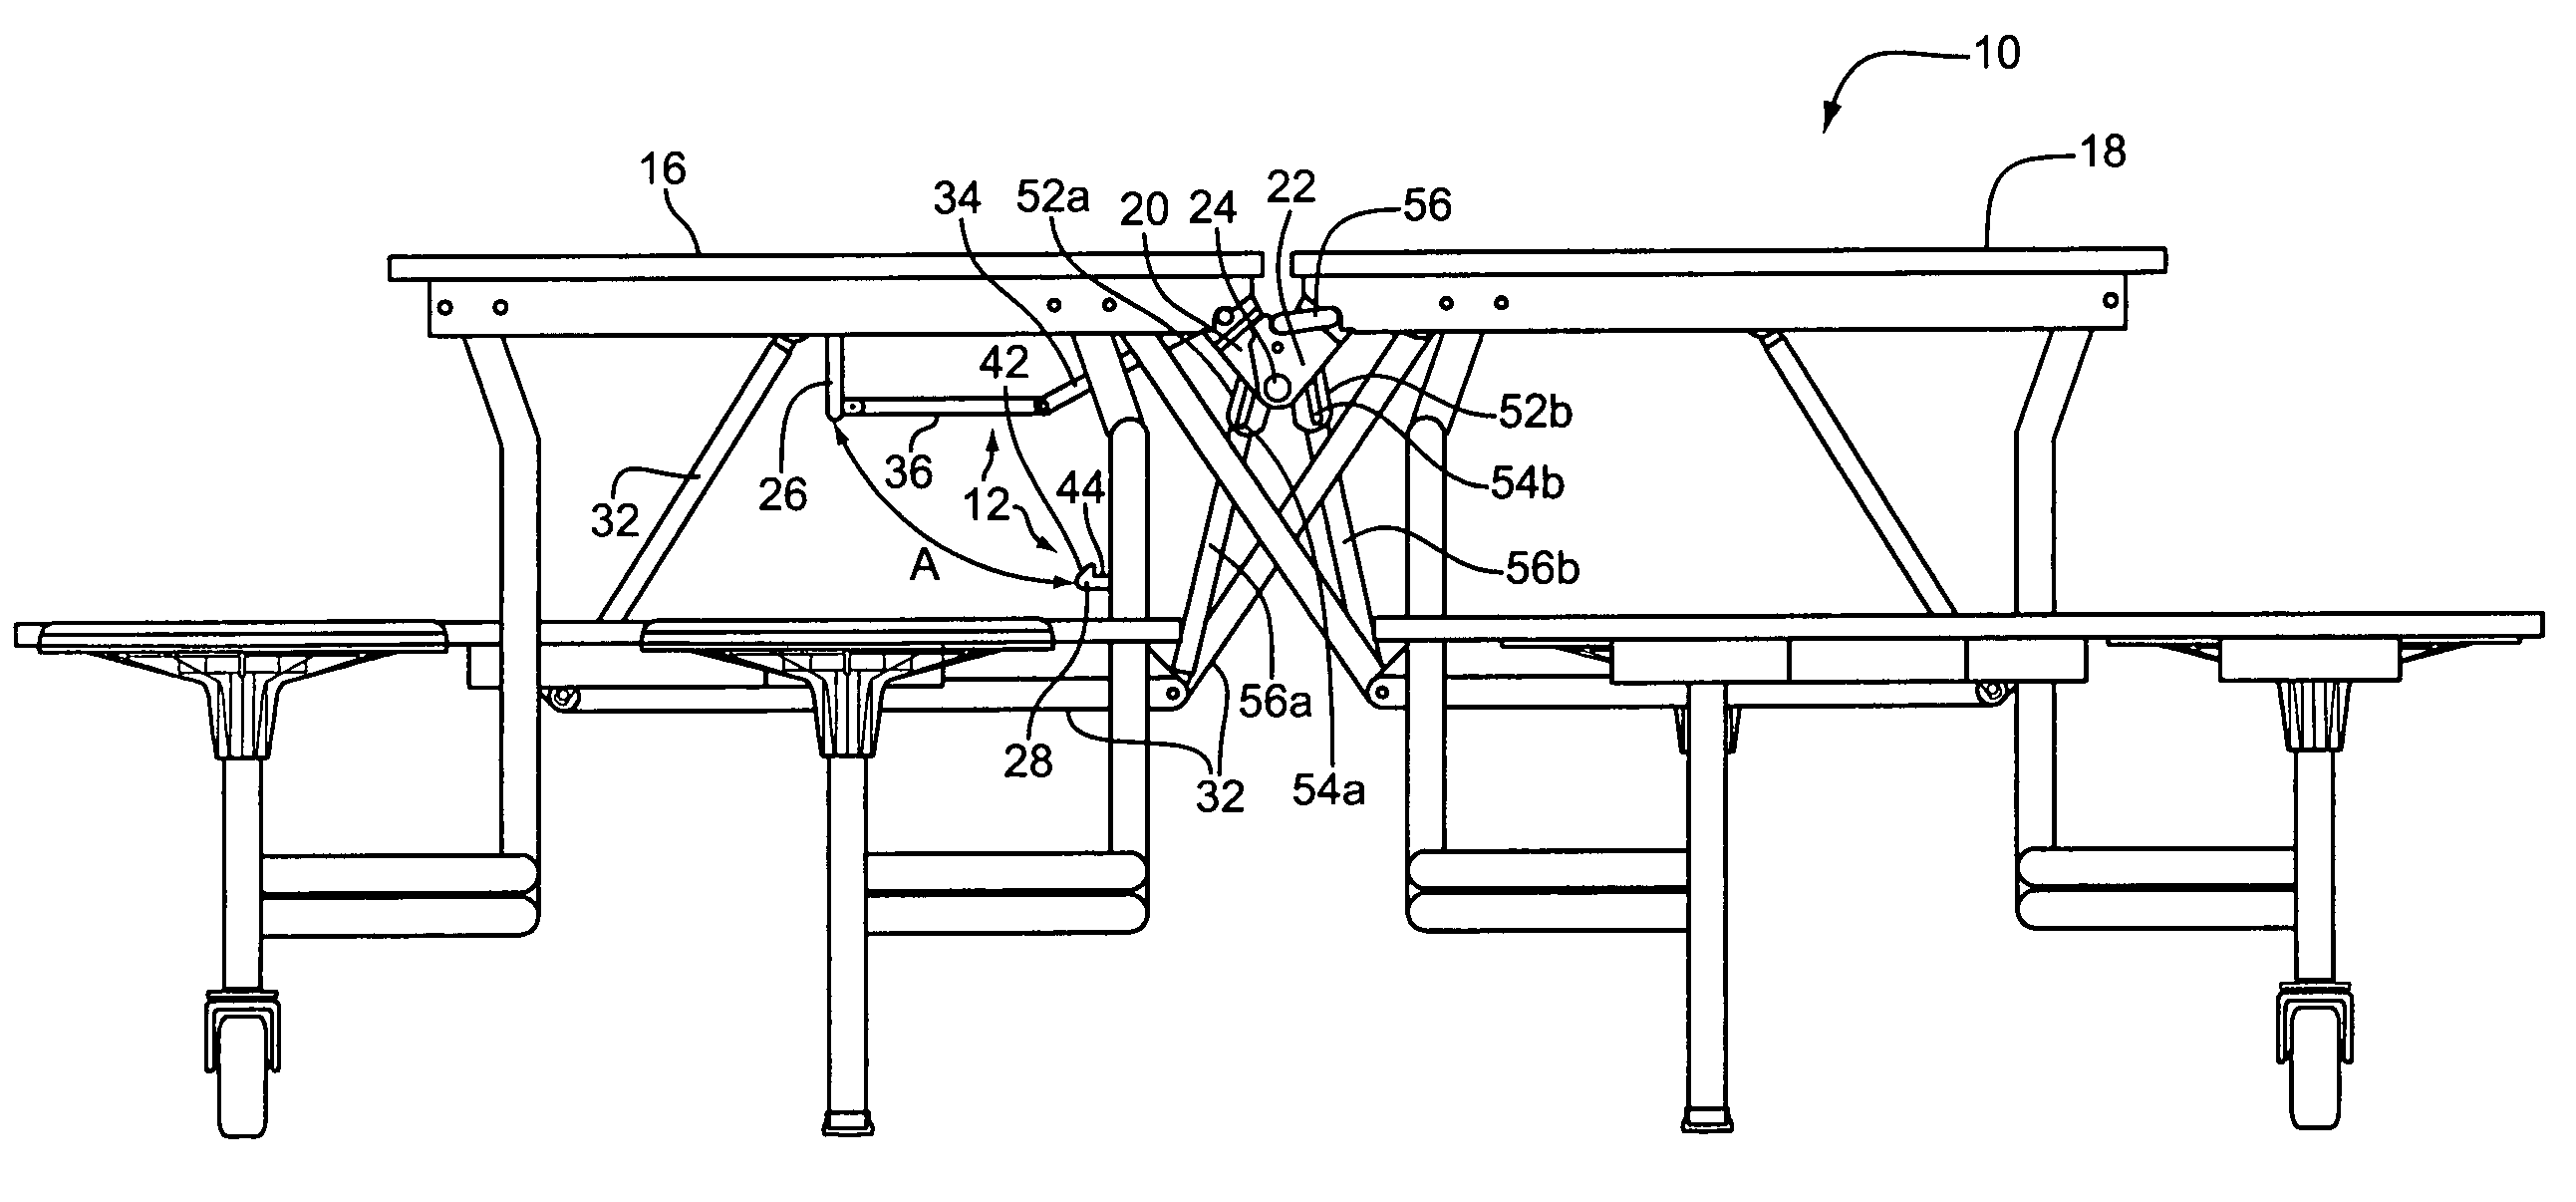 Mobile folding table with improved locking and lift-assisting mechanisms